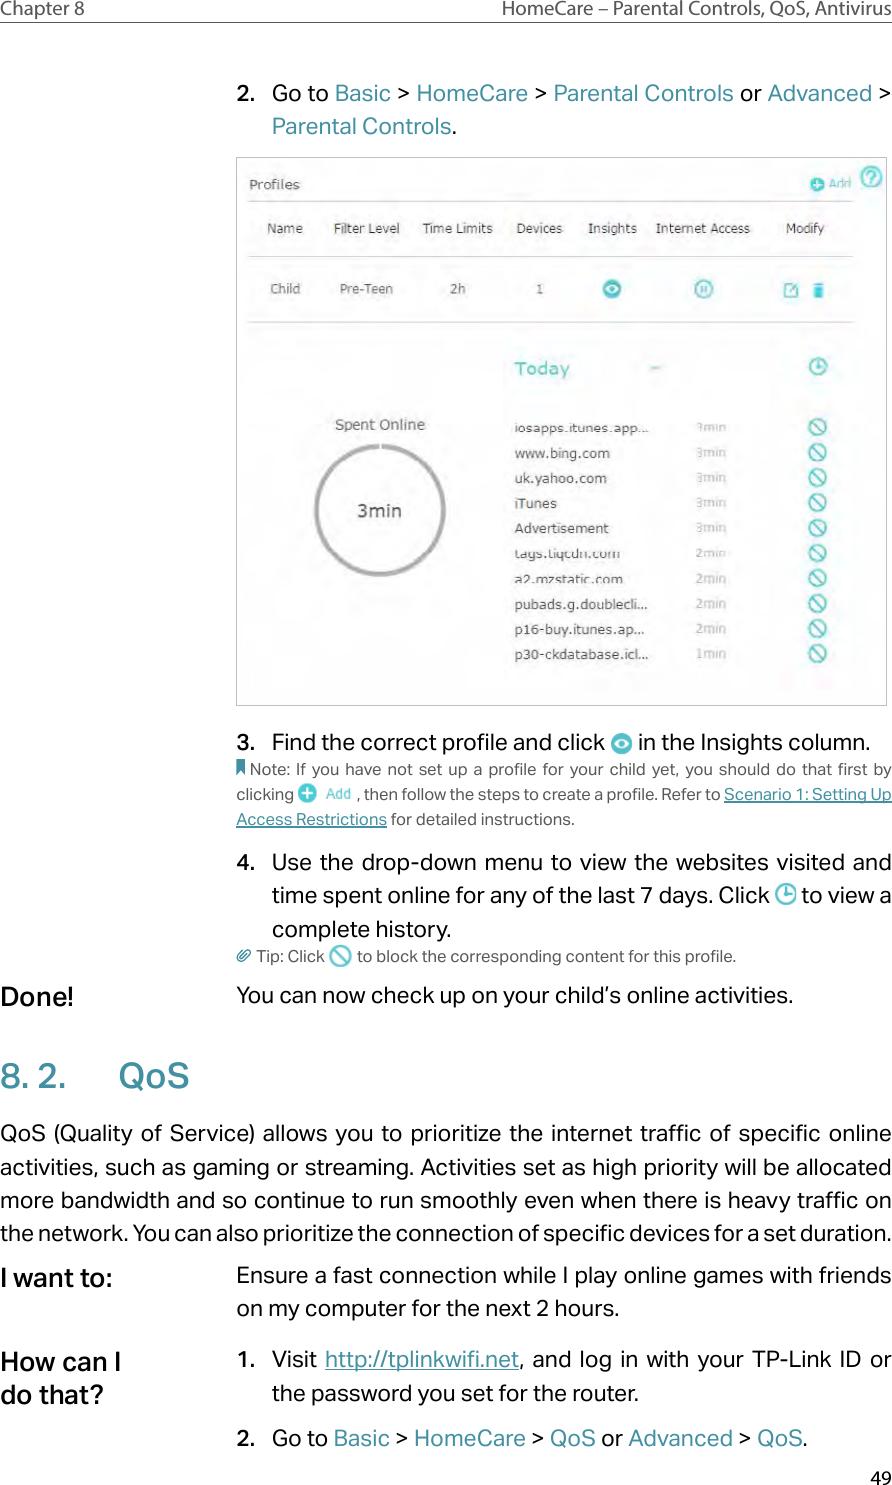 49Chapter 8 HomeCare – Parental Controls, QoS, Antivirus2.  Go to Basic &gt; HomeCare &gt; Parental Controls or Advanced &gt; Parental Controls.3.  Find the correct profile and click   in the Insights column.Note: If you have not set up a profile for your child yet, you should do that first by clicking  , then follow the steps to create a profile. Refer to Scenario 1: Setting Up Access Restrictions for detailed instructions.4.  Use the drop-down menu to view the websites visited and time spent online for any of the last 7 days. Click   to view a complete history. Tip: Click   to block the corresponding content for this profile.You can now check up on your child’s online activities.8. 2.  QoSQoS (Quality of Service) allows you to prioritize the internet traffic of specific online activities, such as gaming or streaming. Activities set as high priority will be allocated more bandwidth and so continue to run smoothly even when there is heavy traffic on the network. You can also prioritize the connection of specific devices for a set duration.Ensure a fast connection while I play online games with friends on my computer for the next 2 hours.1.  Visit http://tplinkwifi.net, and log in with your TP-Link ID or the password you set for the router. 2.  Go to Basic &gt; HomeCare &gt; QoS or Advanced &gt; QoS.Done!I want to:How can I do that?